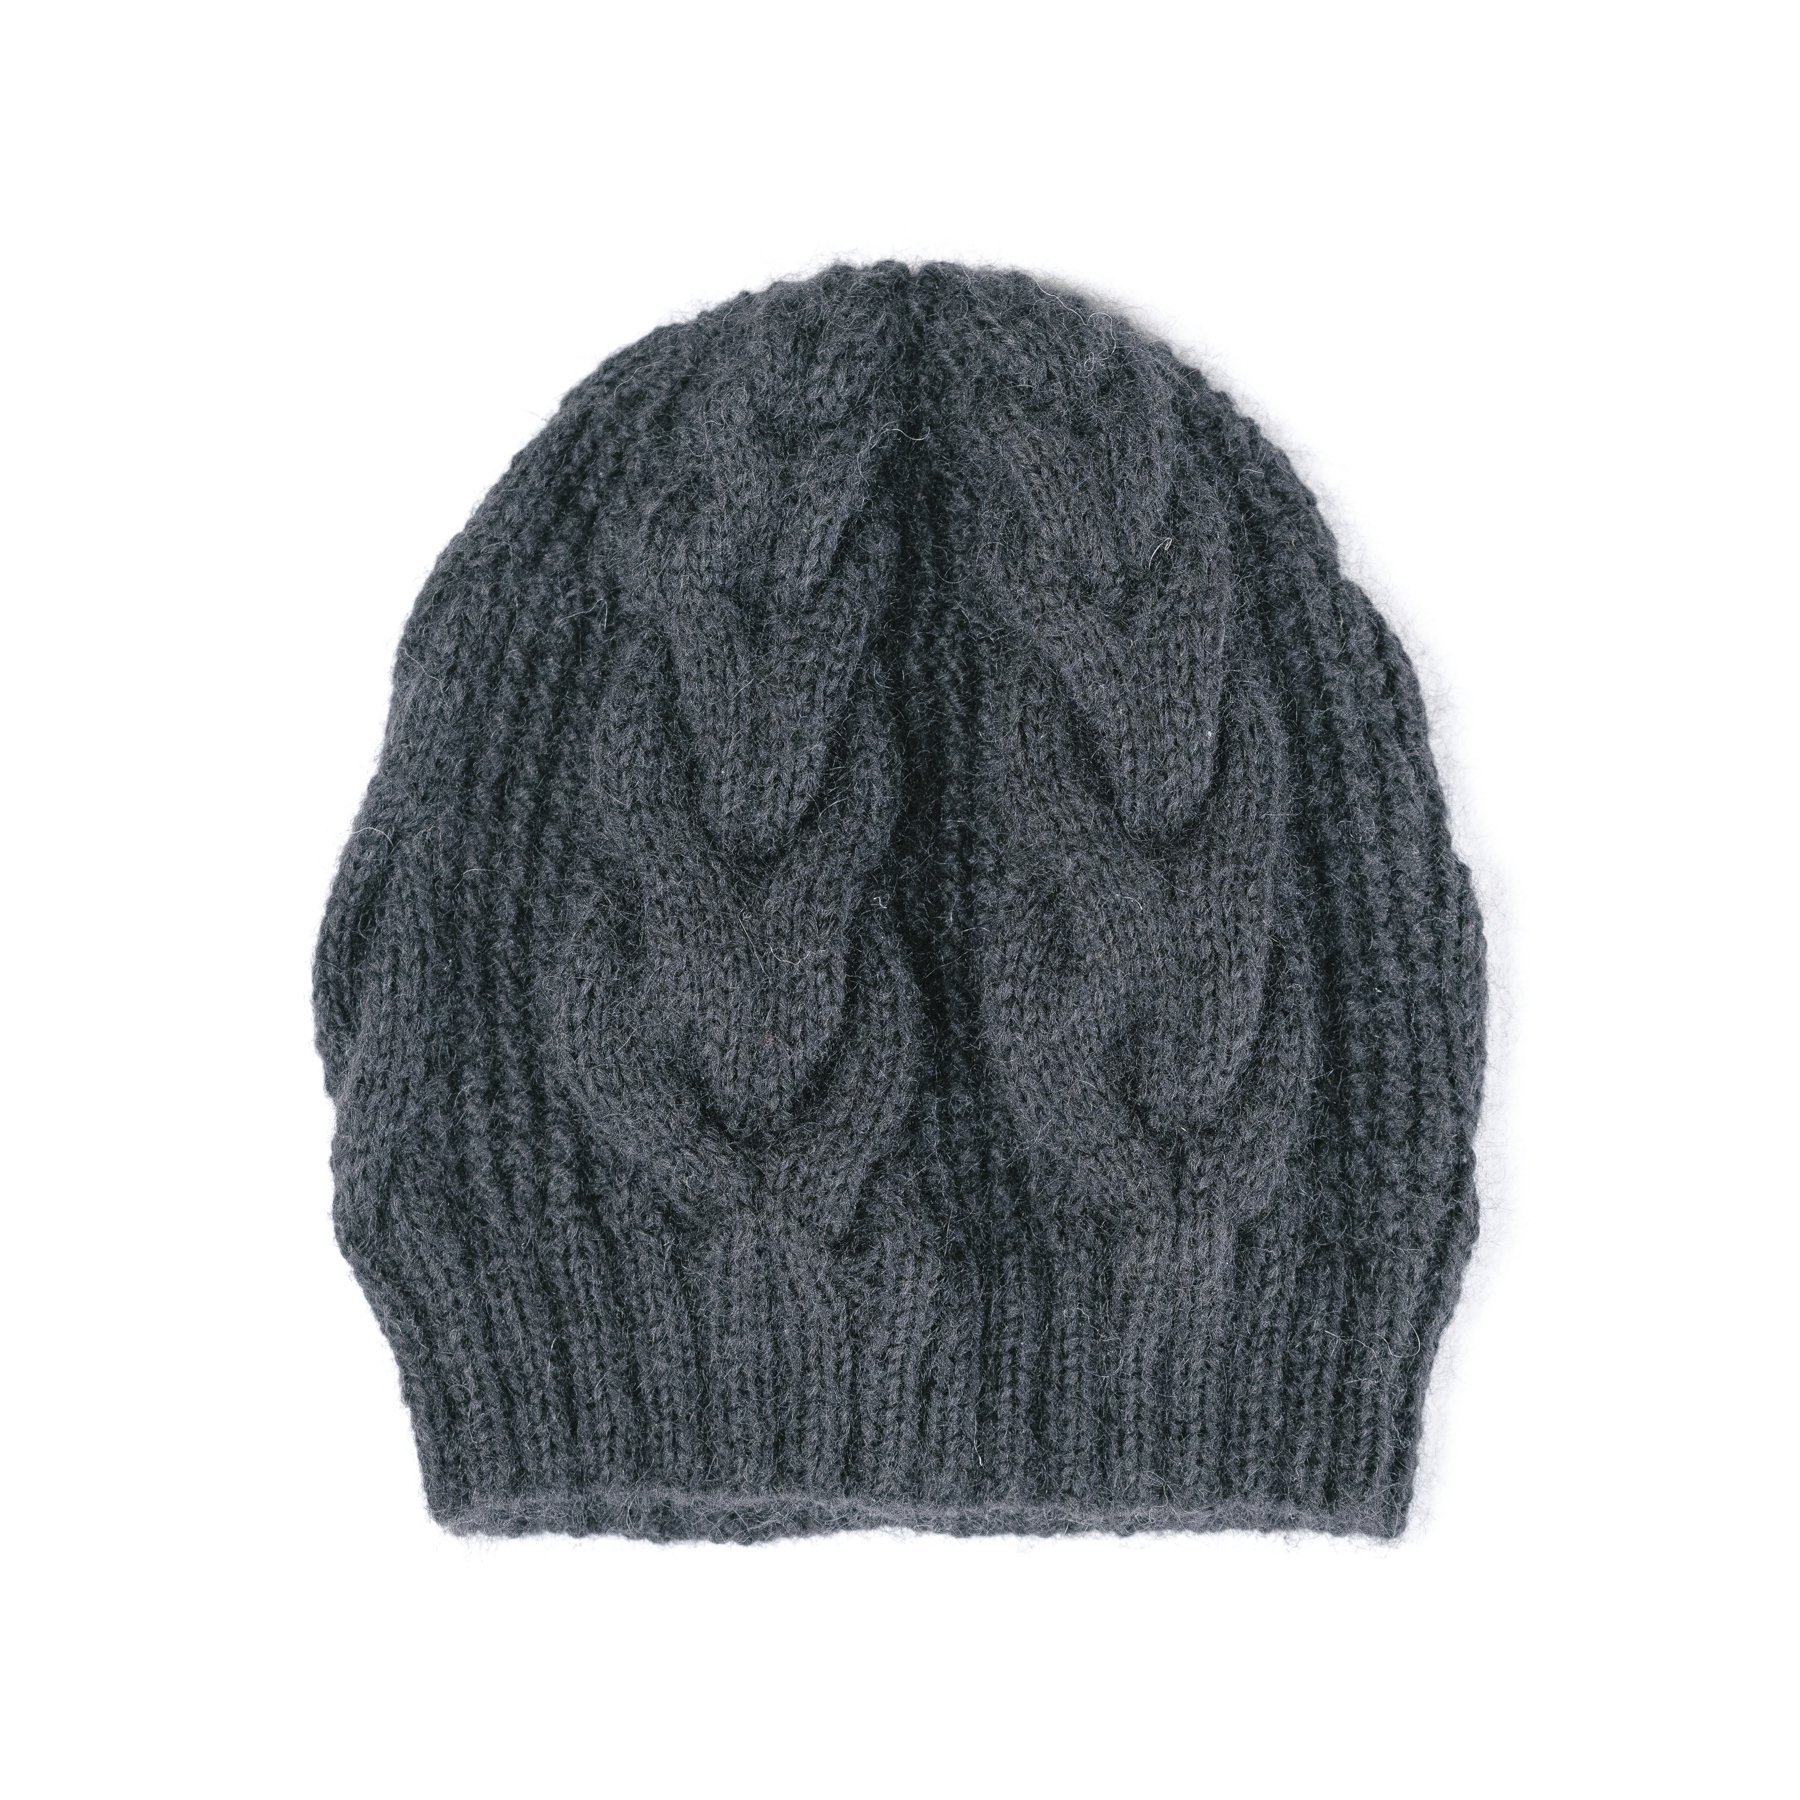 Wool Mohair Cable Knit Beanie